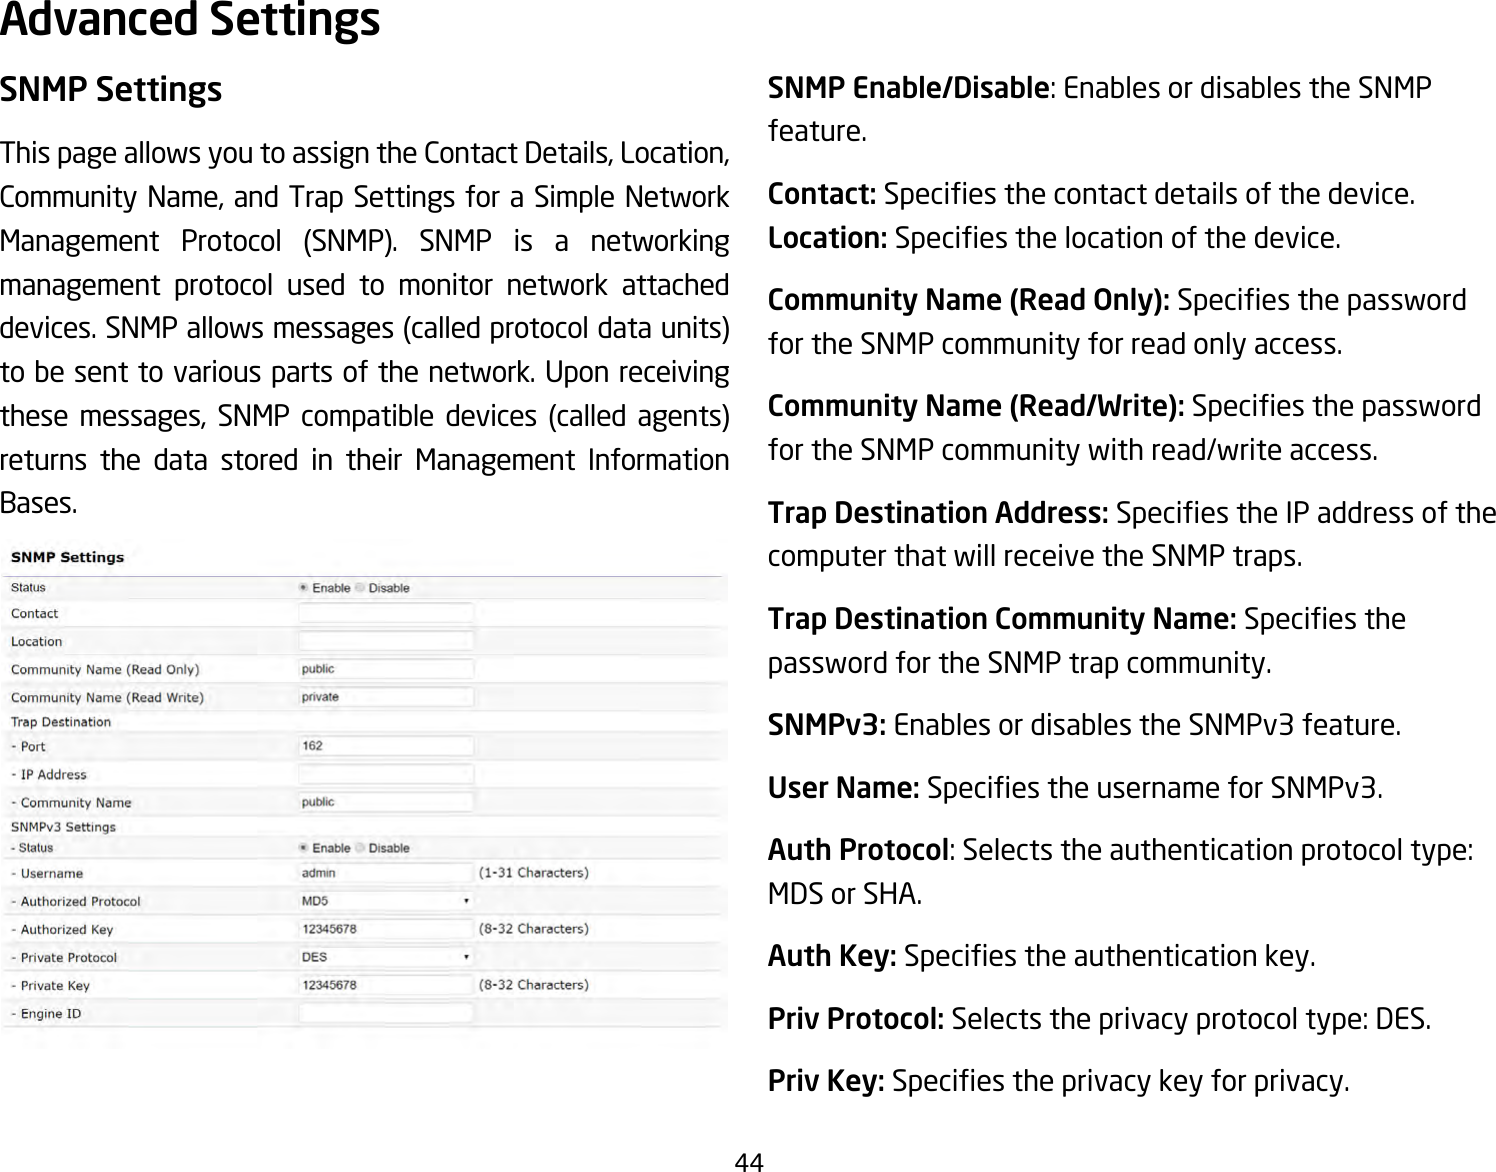 44SNMP SettingsThis page allows you to assign the Contact Details, Location, Community Name, and Trap Settings for a Simple Network Management Protocol (SNMP). SNMP is a networking management protocol used to monitor network attached devices. SNMP allows messages (called protocol data units) to be sent to various parts of the network. Upon receiving these messages, SNMP compatible devices (called agents) returns the data stored in their Management Information Bases.SNMP Enable/Disable:EnablesordisablestheSNMPfeature.Contact: Speciesthecontactdetailsofthedevice.Location: Speciesthelocationofthedevice.Community Name (Read Only): Speciesthepasswordfor the SNMP community for read only access.Community Name (Read/Write):Speciesthepasswordfor the SNMP community with read/write access.Trap Destination Address:SpeciestheIPaddressofthecomputer that will receive the SNMP traps.Trap Destination Community Name: Speciesthepassword for the SNMP trap community.SNMPv3: Enables or disables the SNMPv3 feature.User Name:SpeciestheusernameforSNMPv3.Auth Protocol:Selectstheauthenticationprotocoltype:MDS or SHA.Auth Key: Speciestheauthenticationkey.Priv Protocol:Selectstheprivacyprotocoltype:DES.Priv Key: Speciestheprivacykeyforprivacy.Advanced Settings